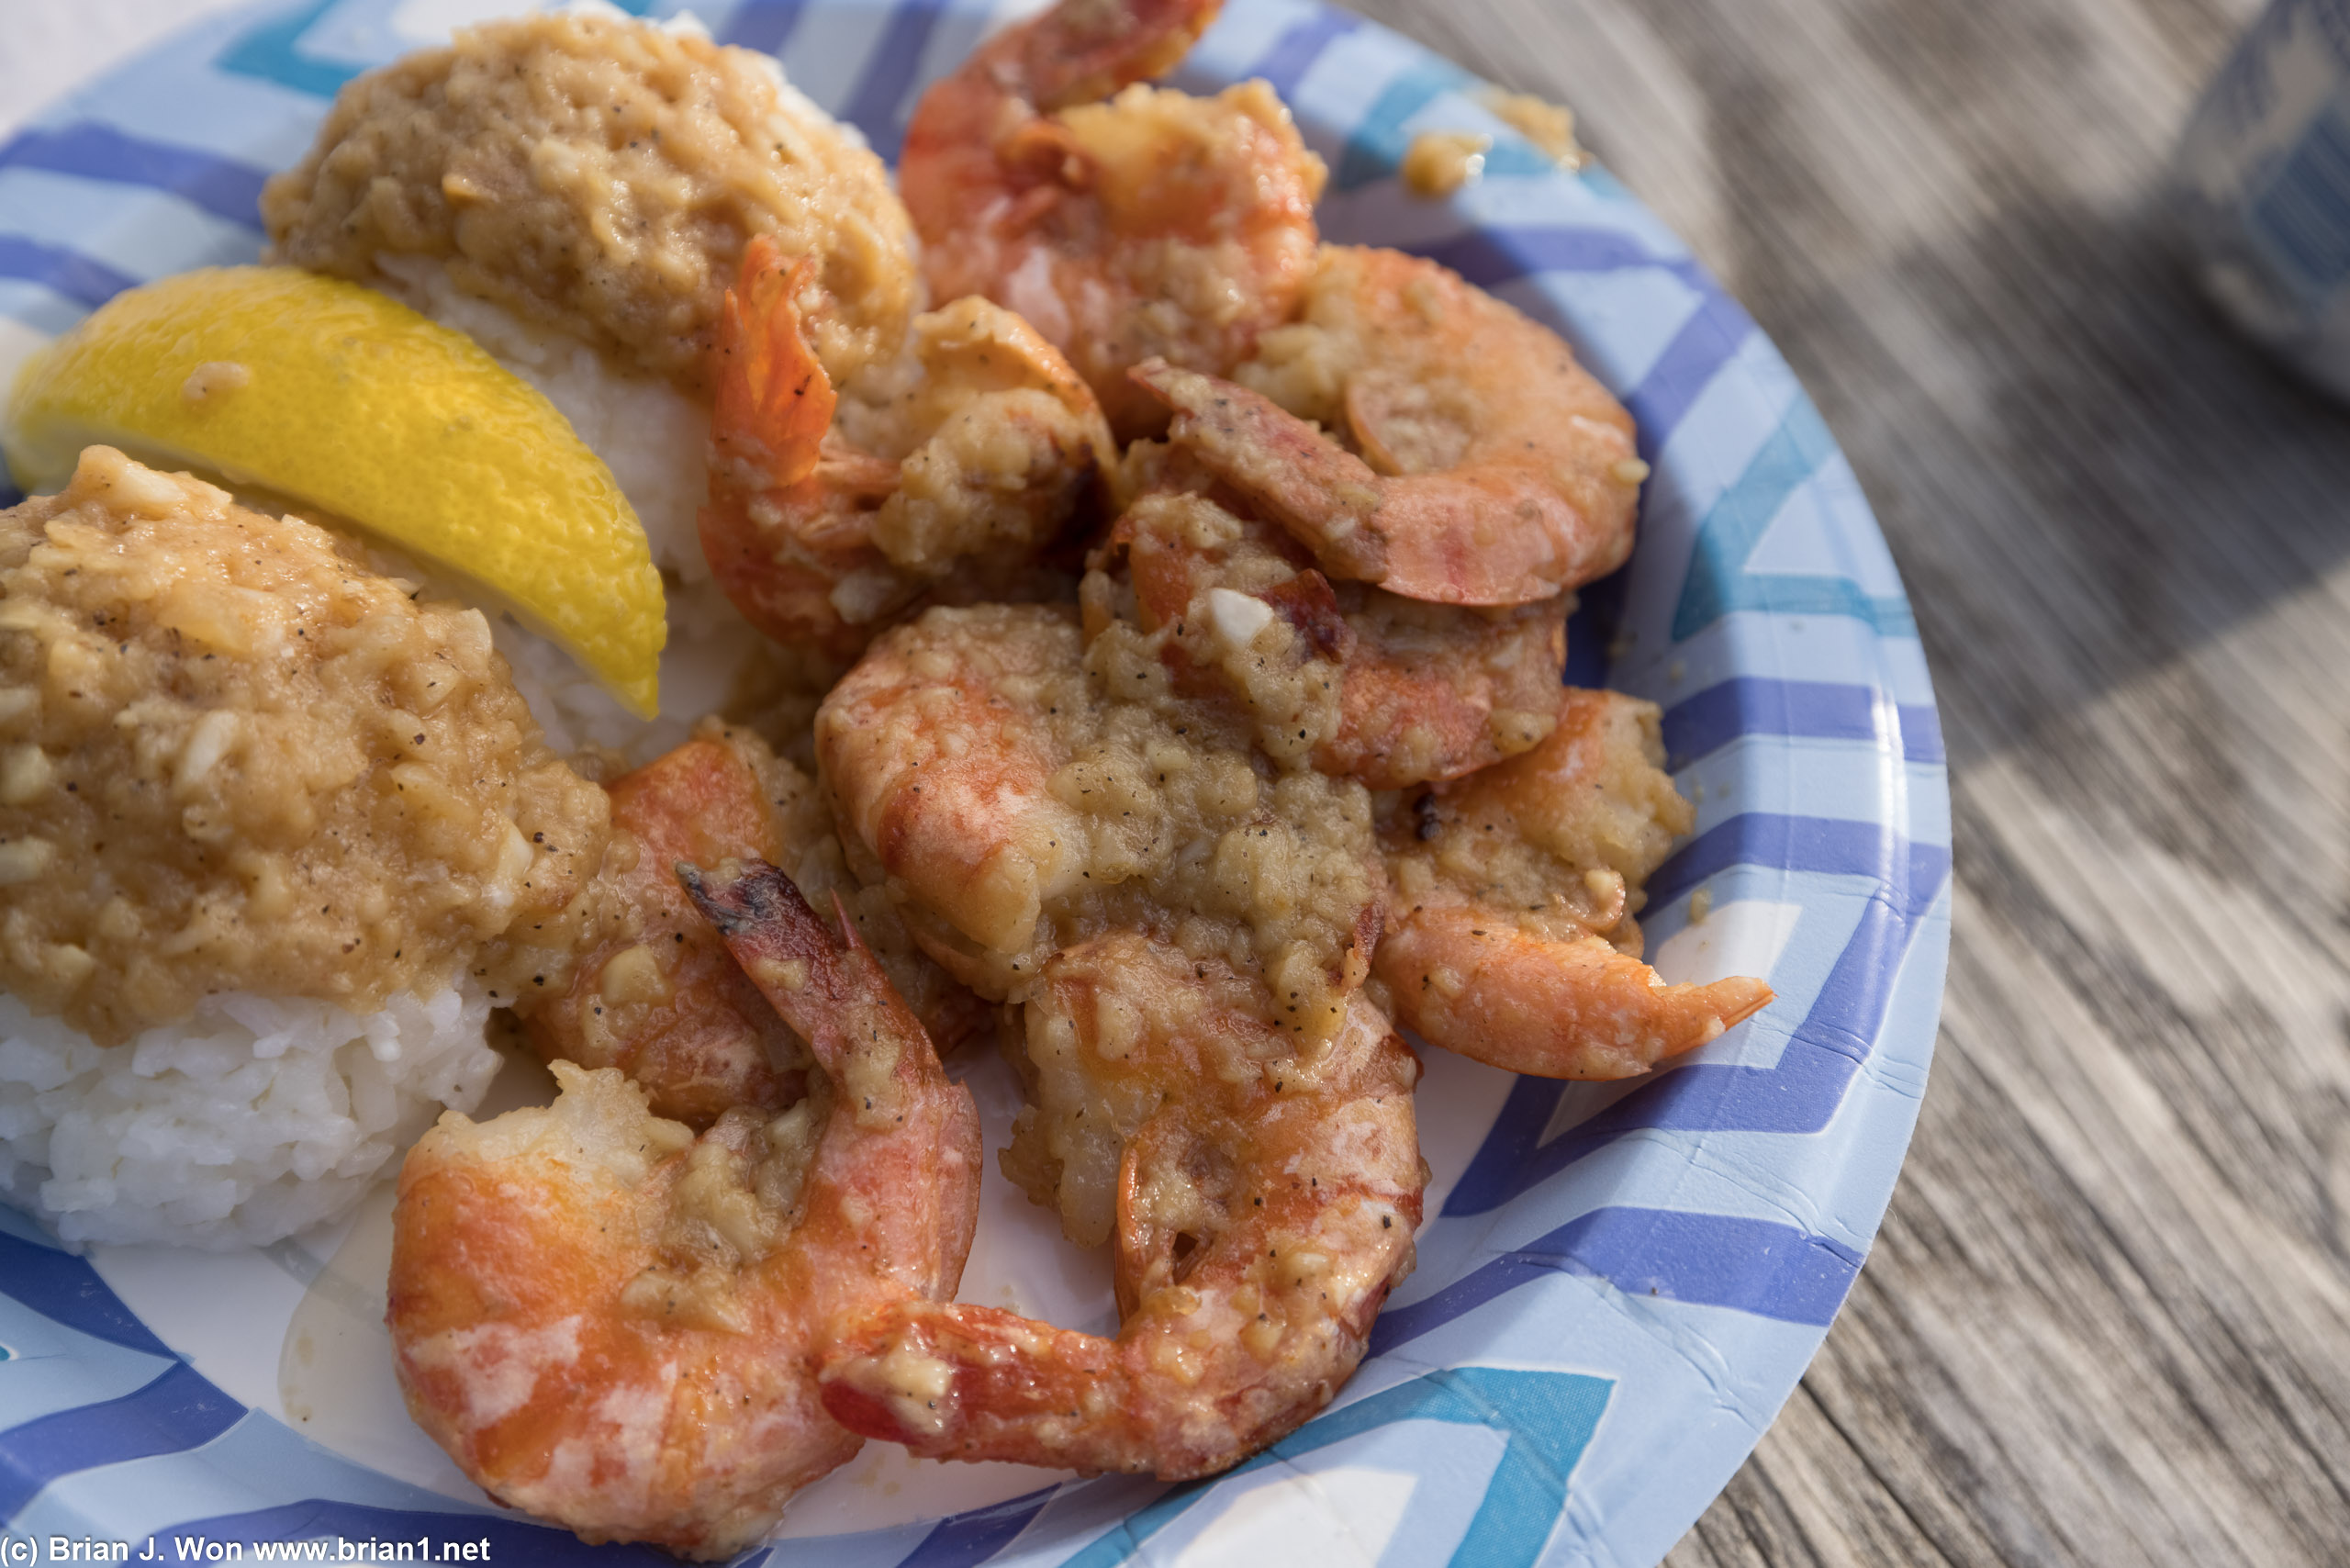 The #1 shrimp scampi at Giovanni's Shrimp Truck. Feels like a smaller portion than before?